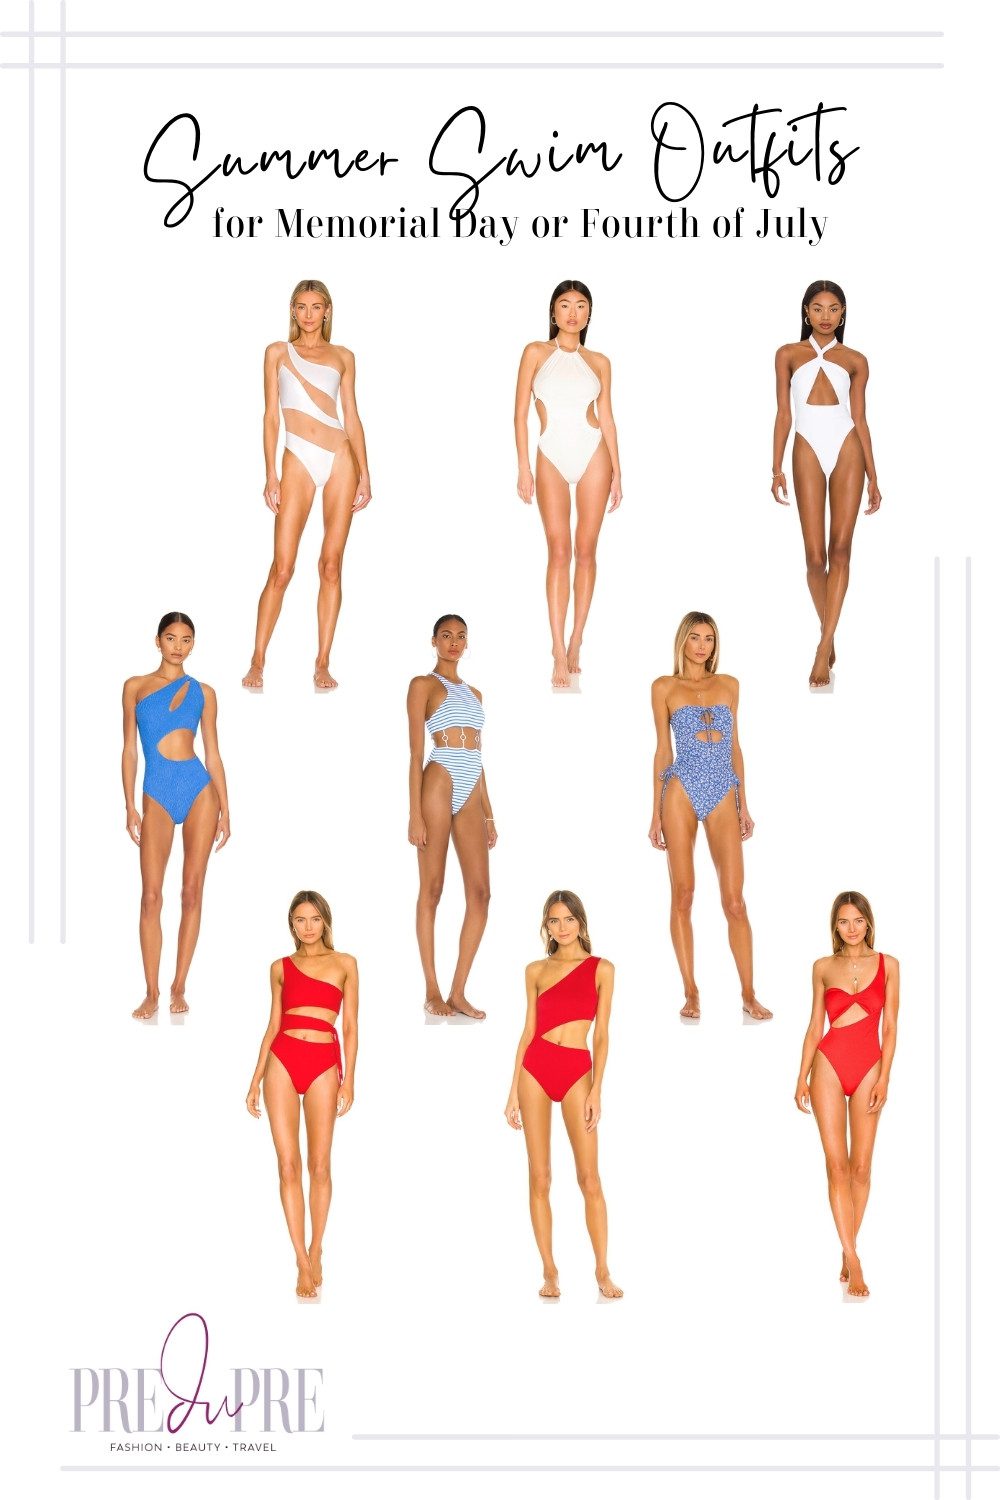 Collage of red, blue, and white one piece cut-out swimsuits for Memorial Day and/or Independence Day on Fourth of July.